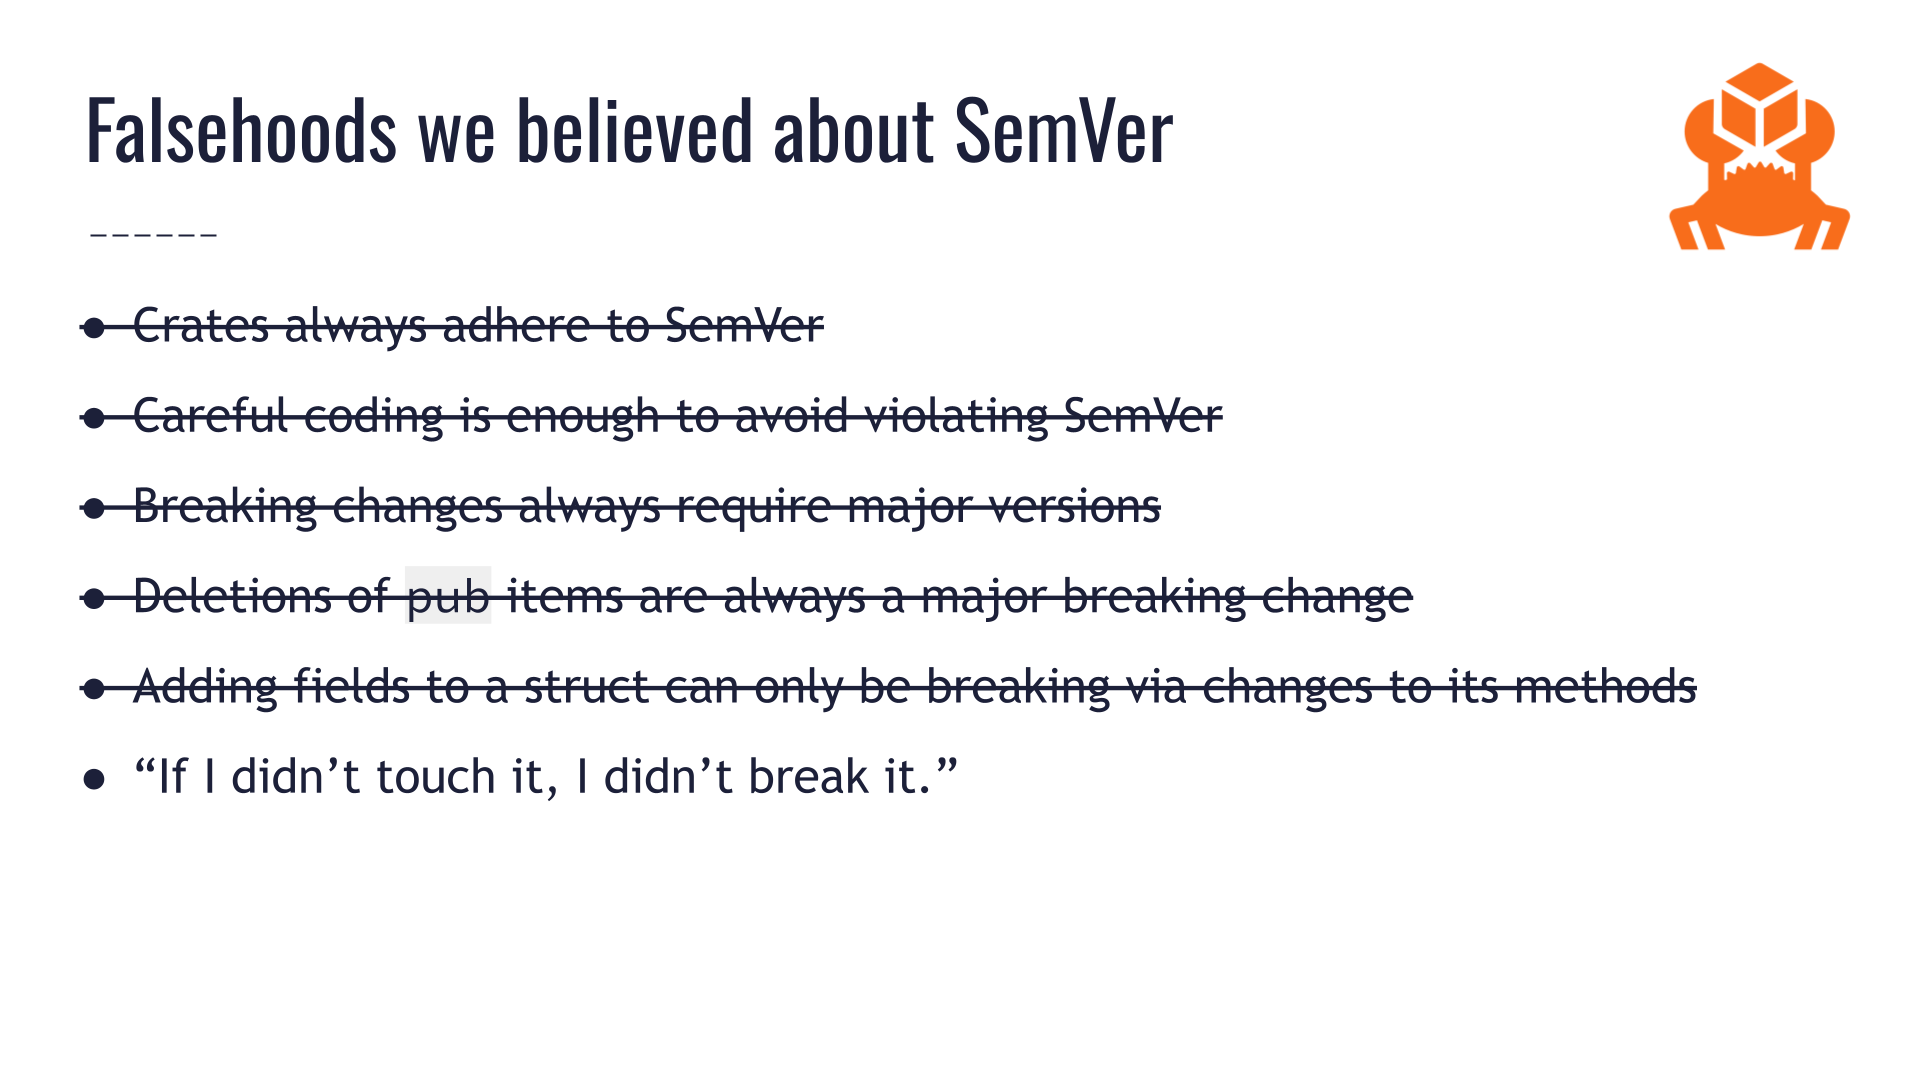 The same slide titled "Falsehoods we believed about SemVer" from earlier. A sixth bullet point says "If I didn't touch it, I didn't break it!" The five prior bullet points are all crossed off.